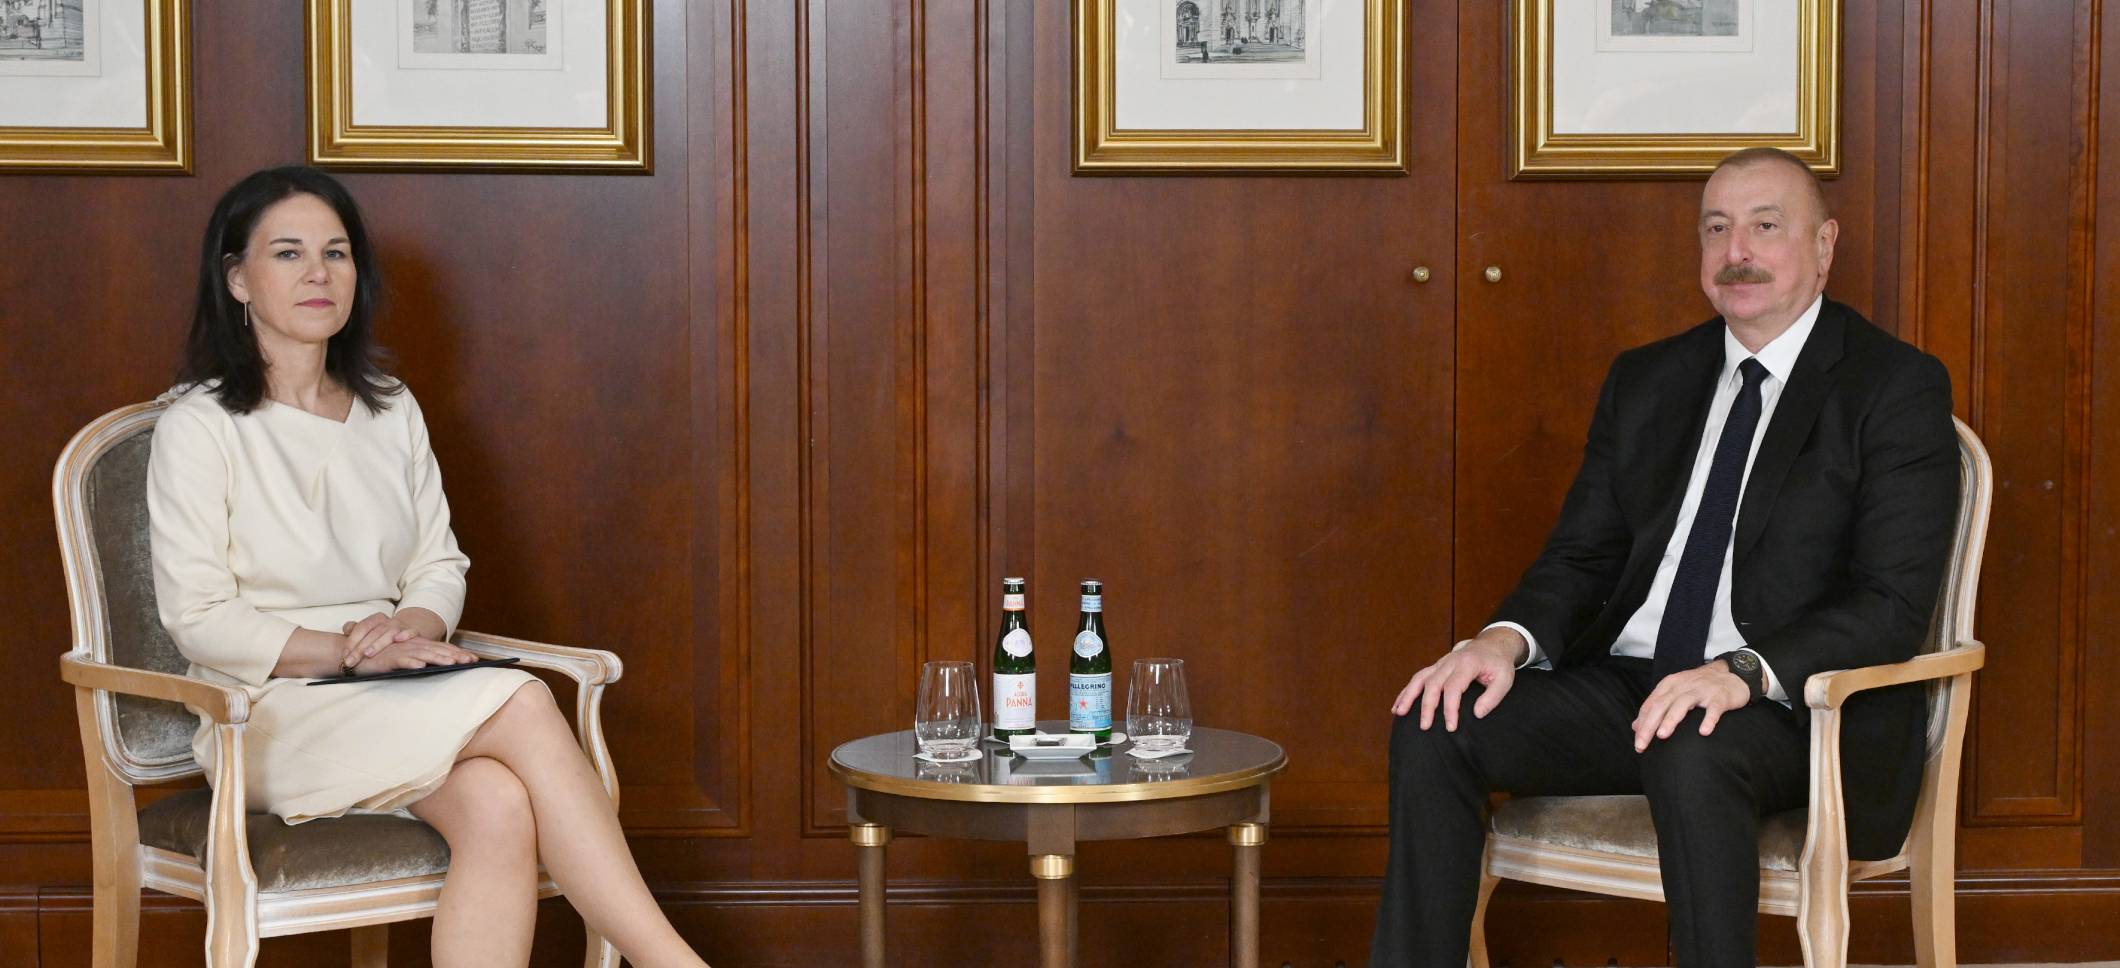 Ilham Aliyev held meeting with Foreign Minister of Germany in Berlin